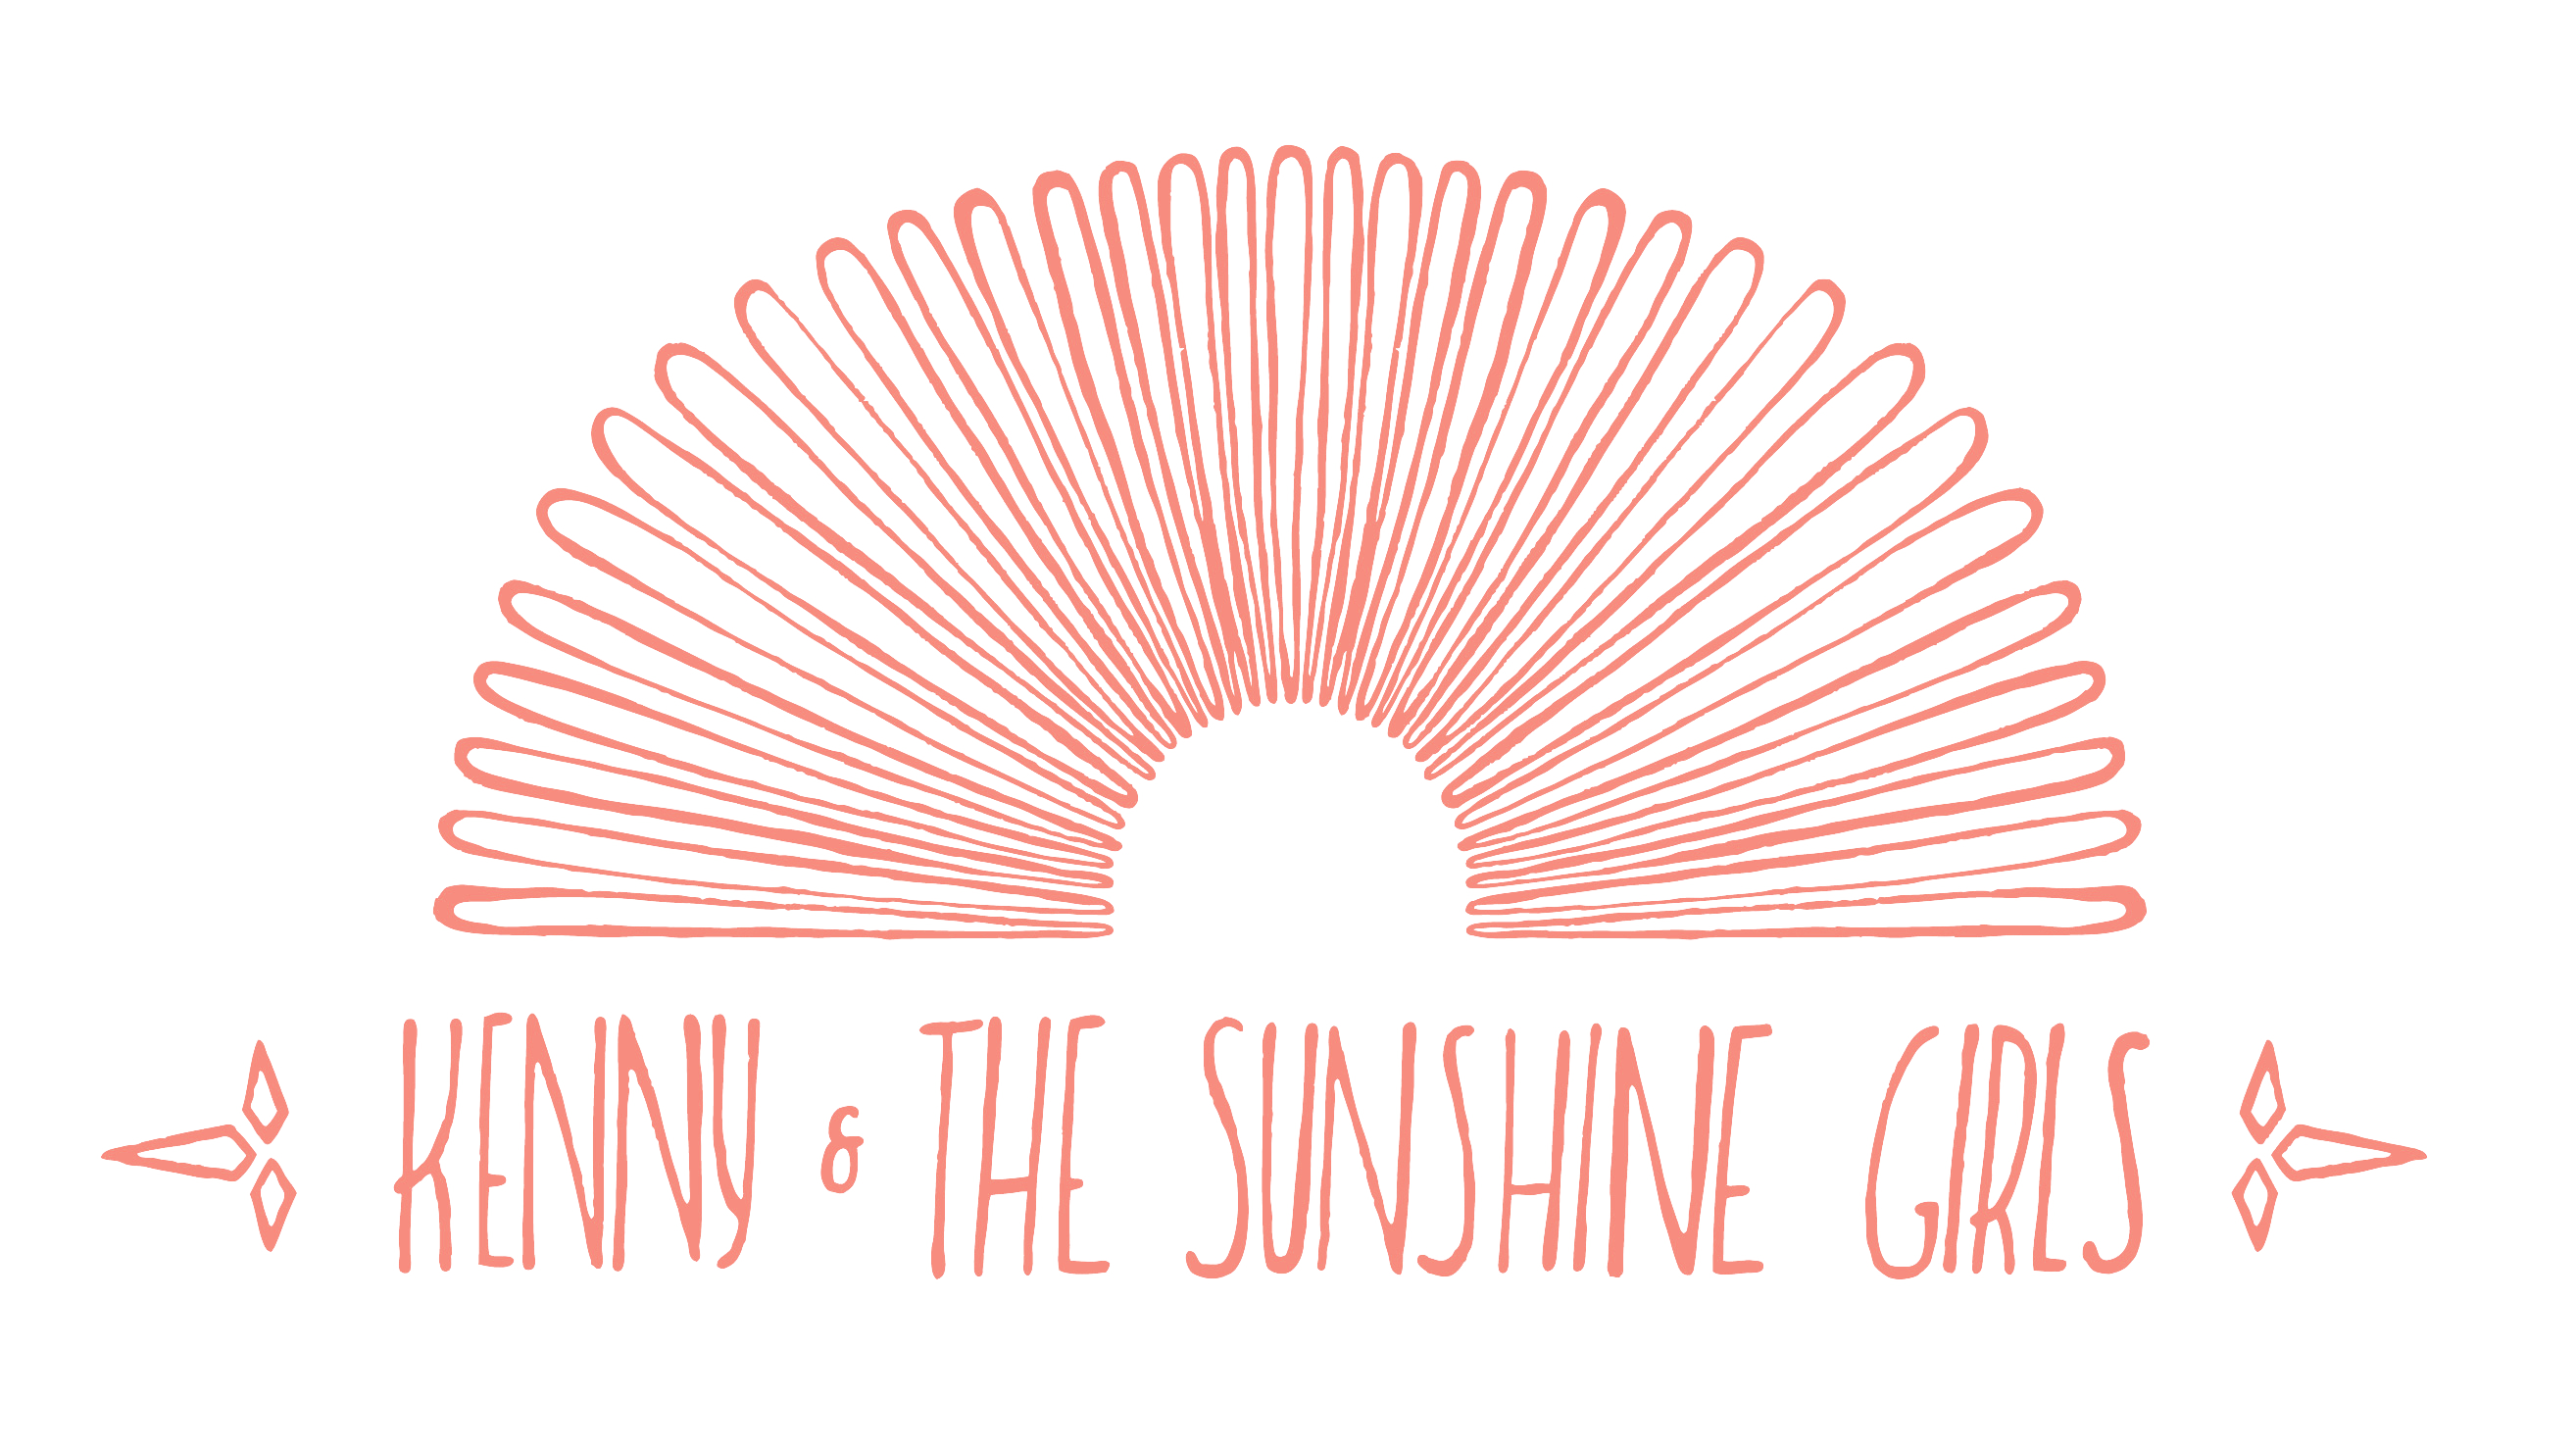 Kenny and the Sunshine Girls